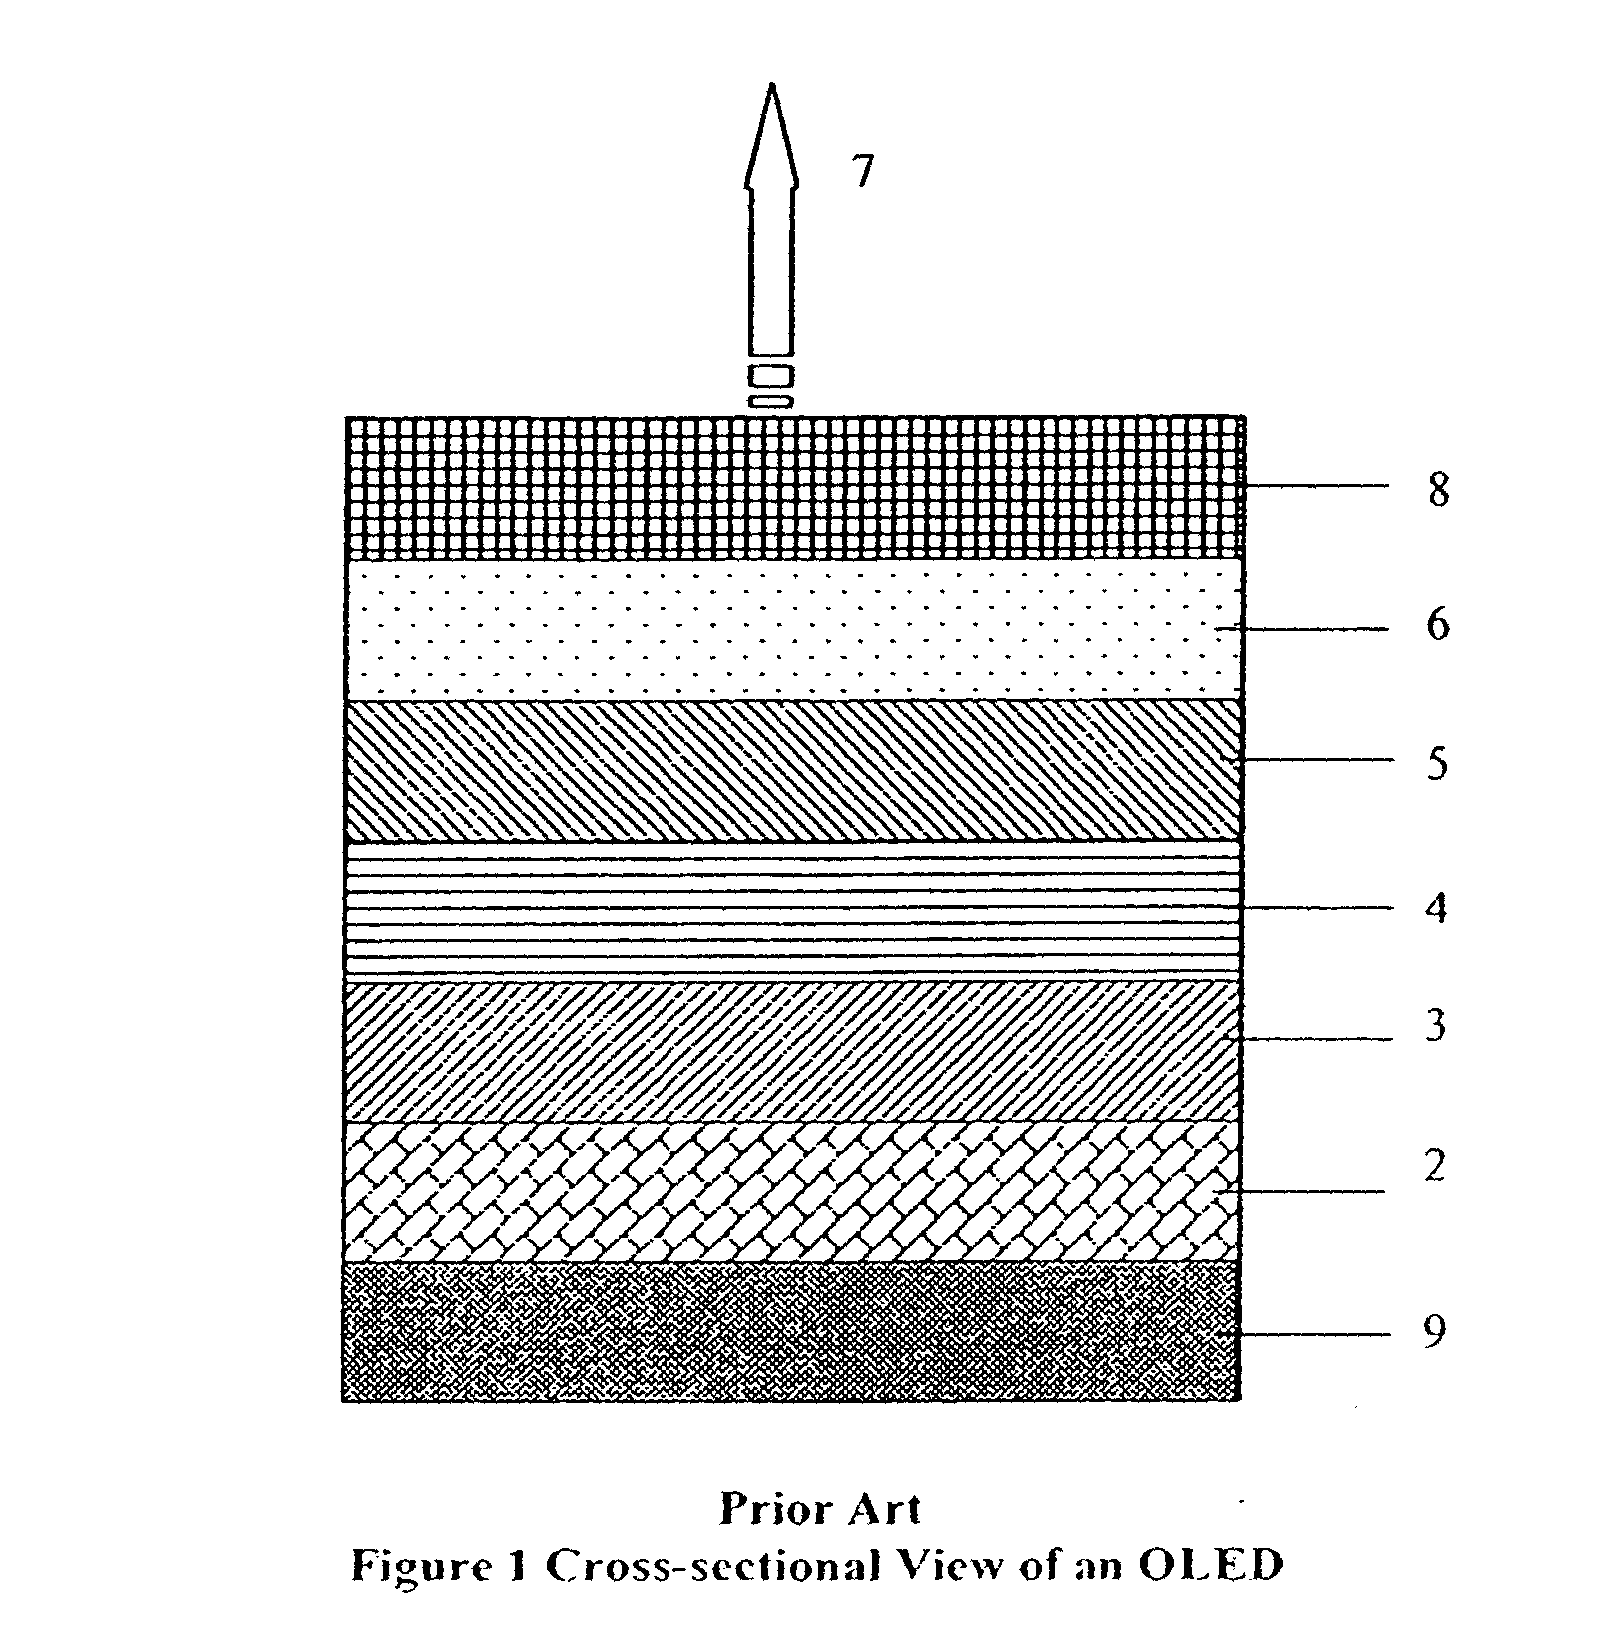 Method for manufacturing a display device with low temperature diamond coatings